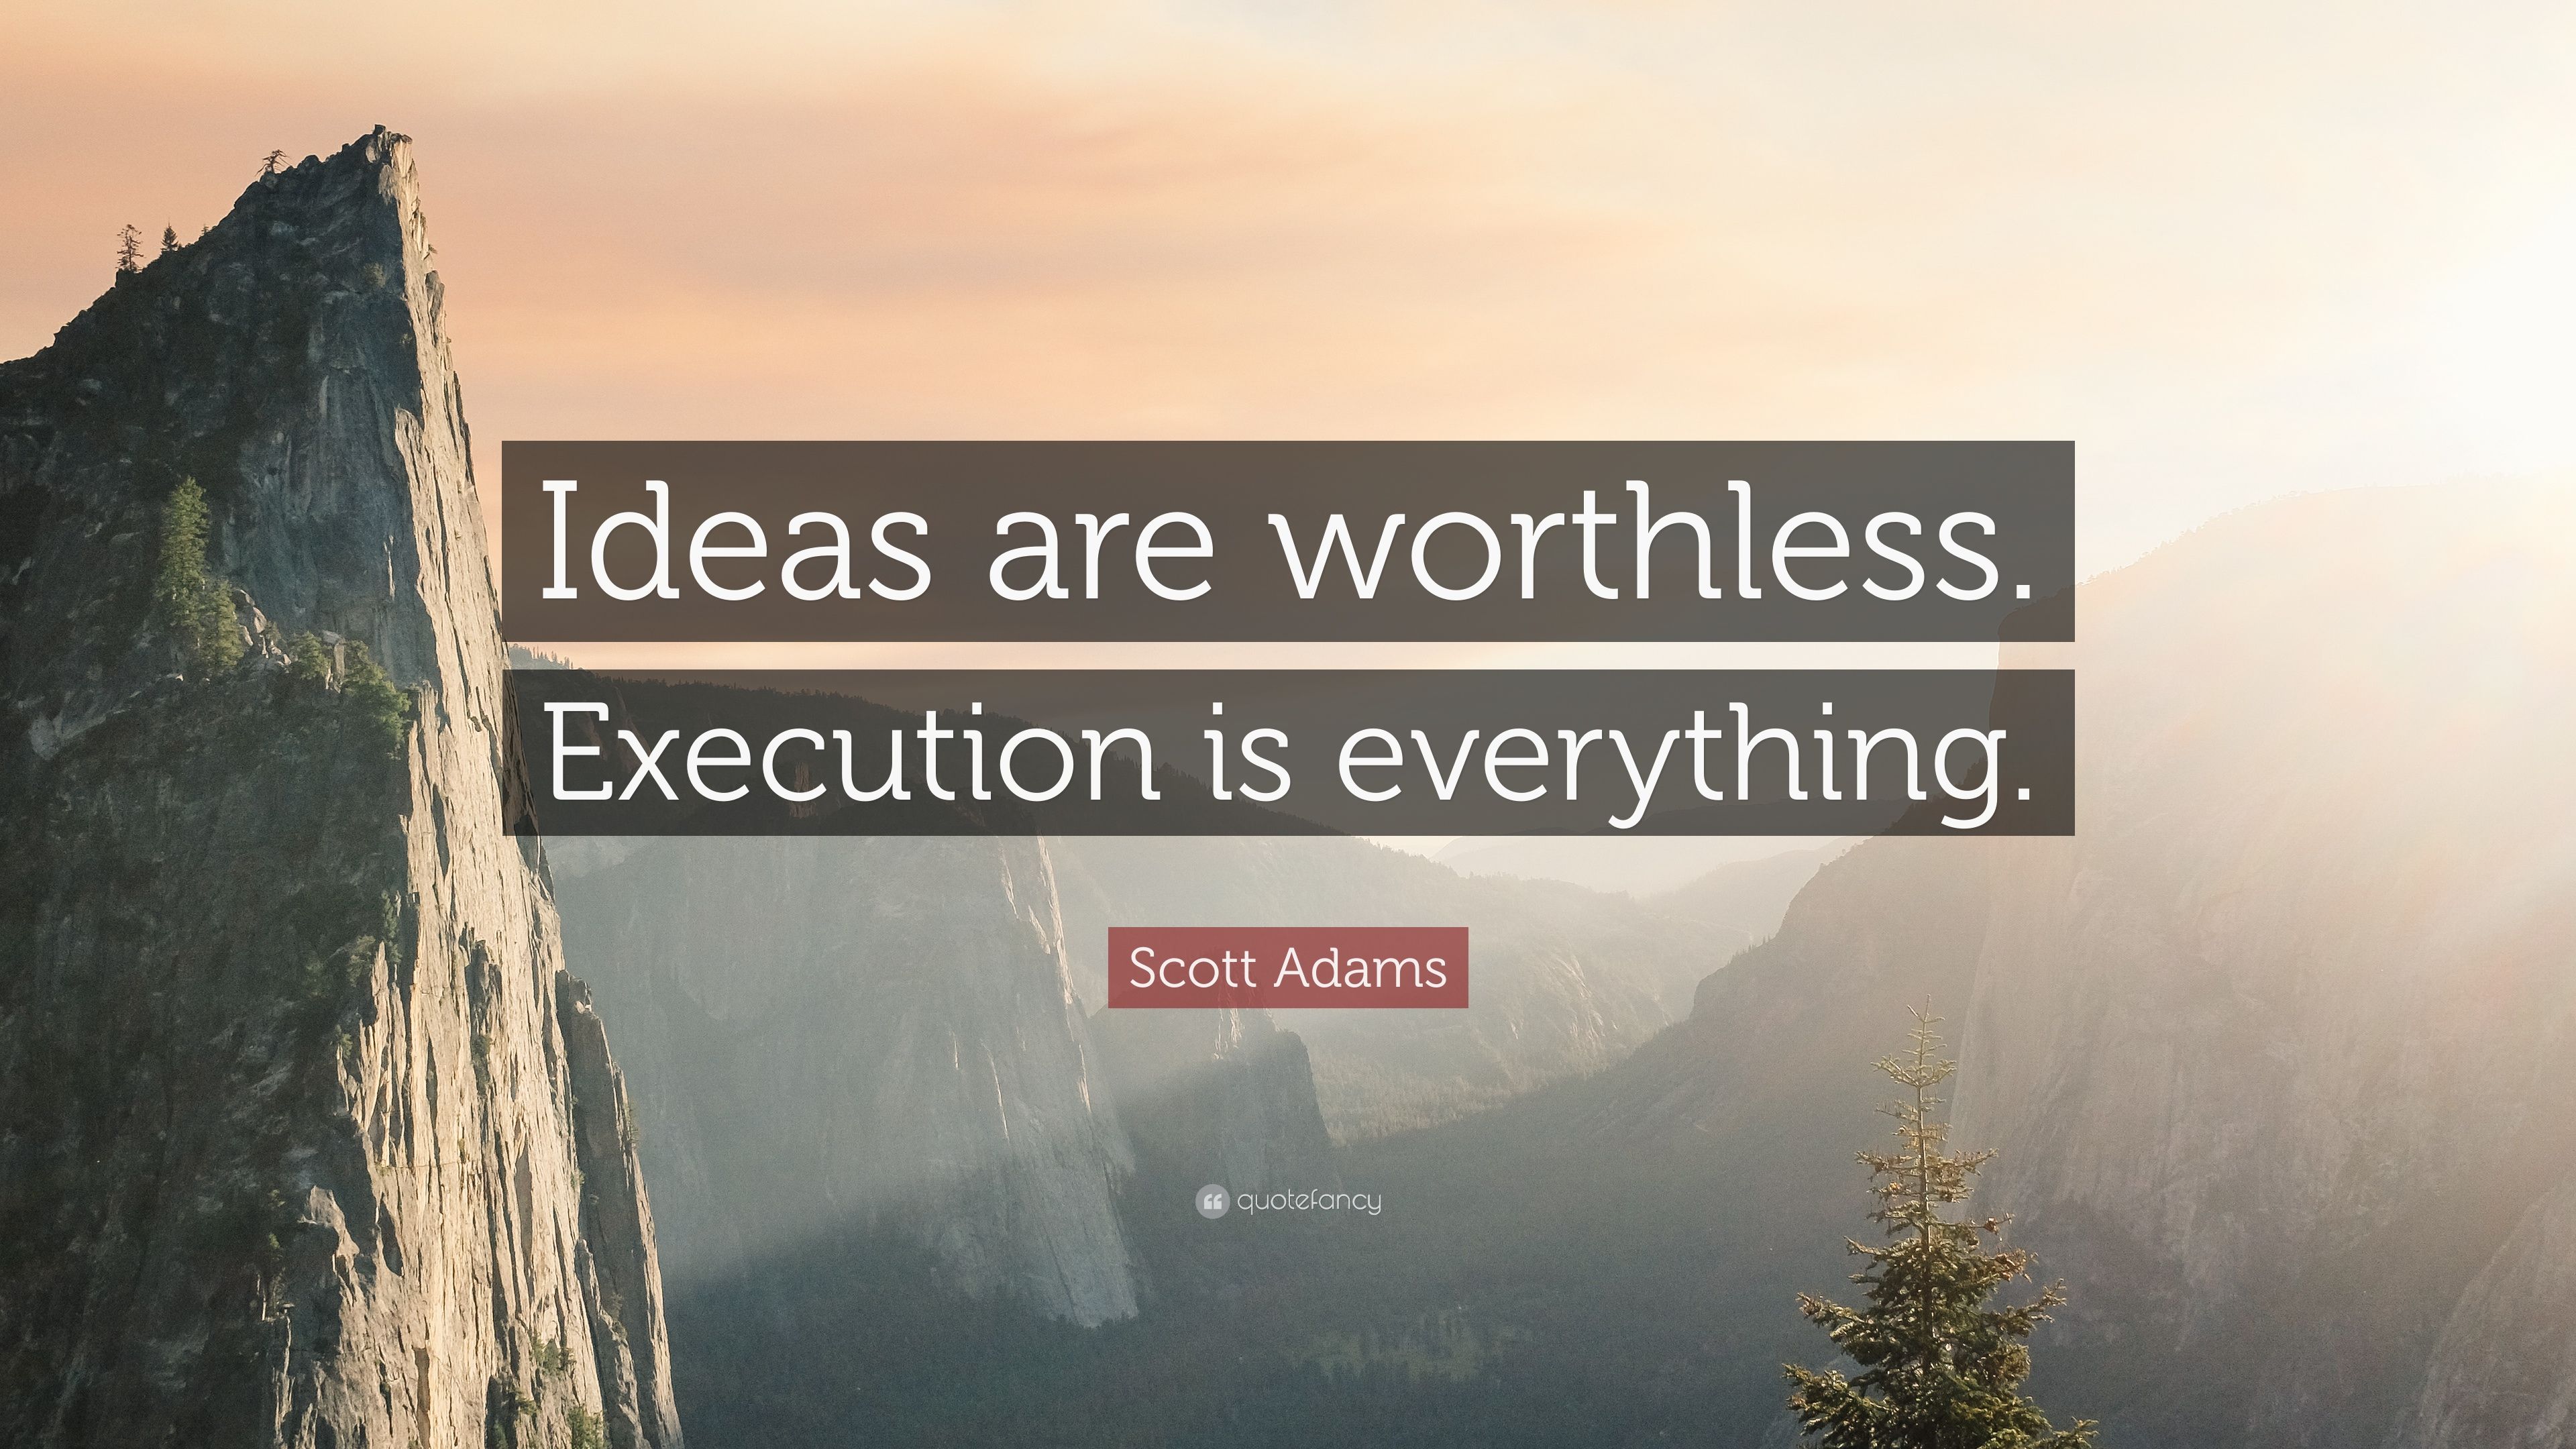 Scott Adams Quote: “Ideas are worthless. Execution is everything.” (11 wallpaper)